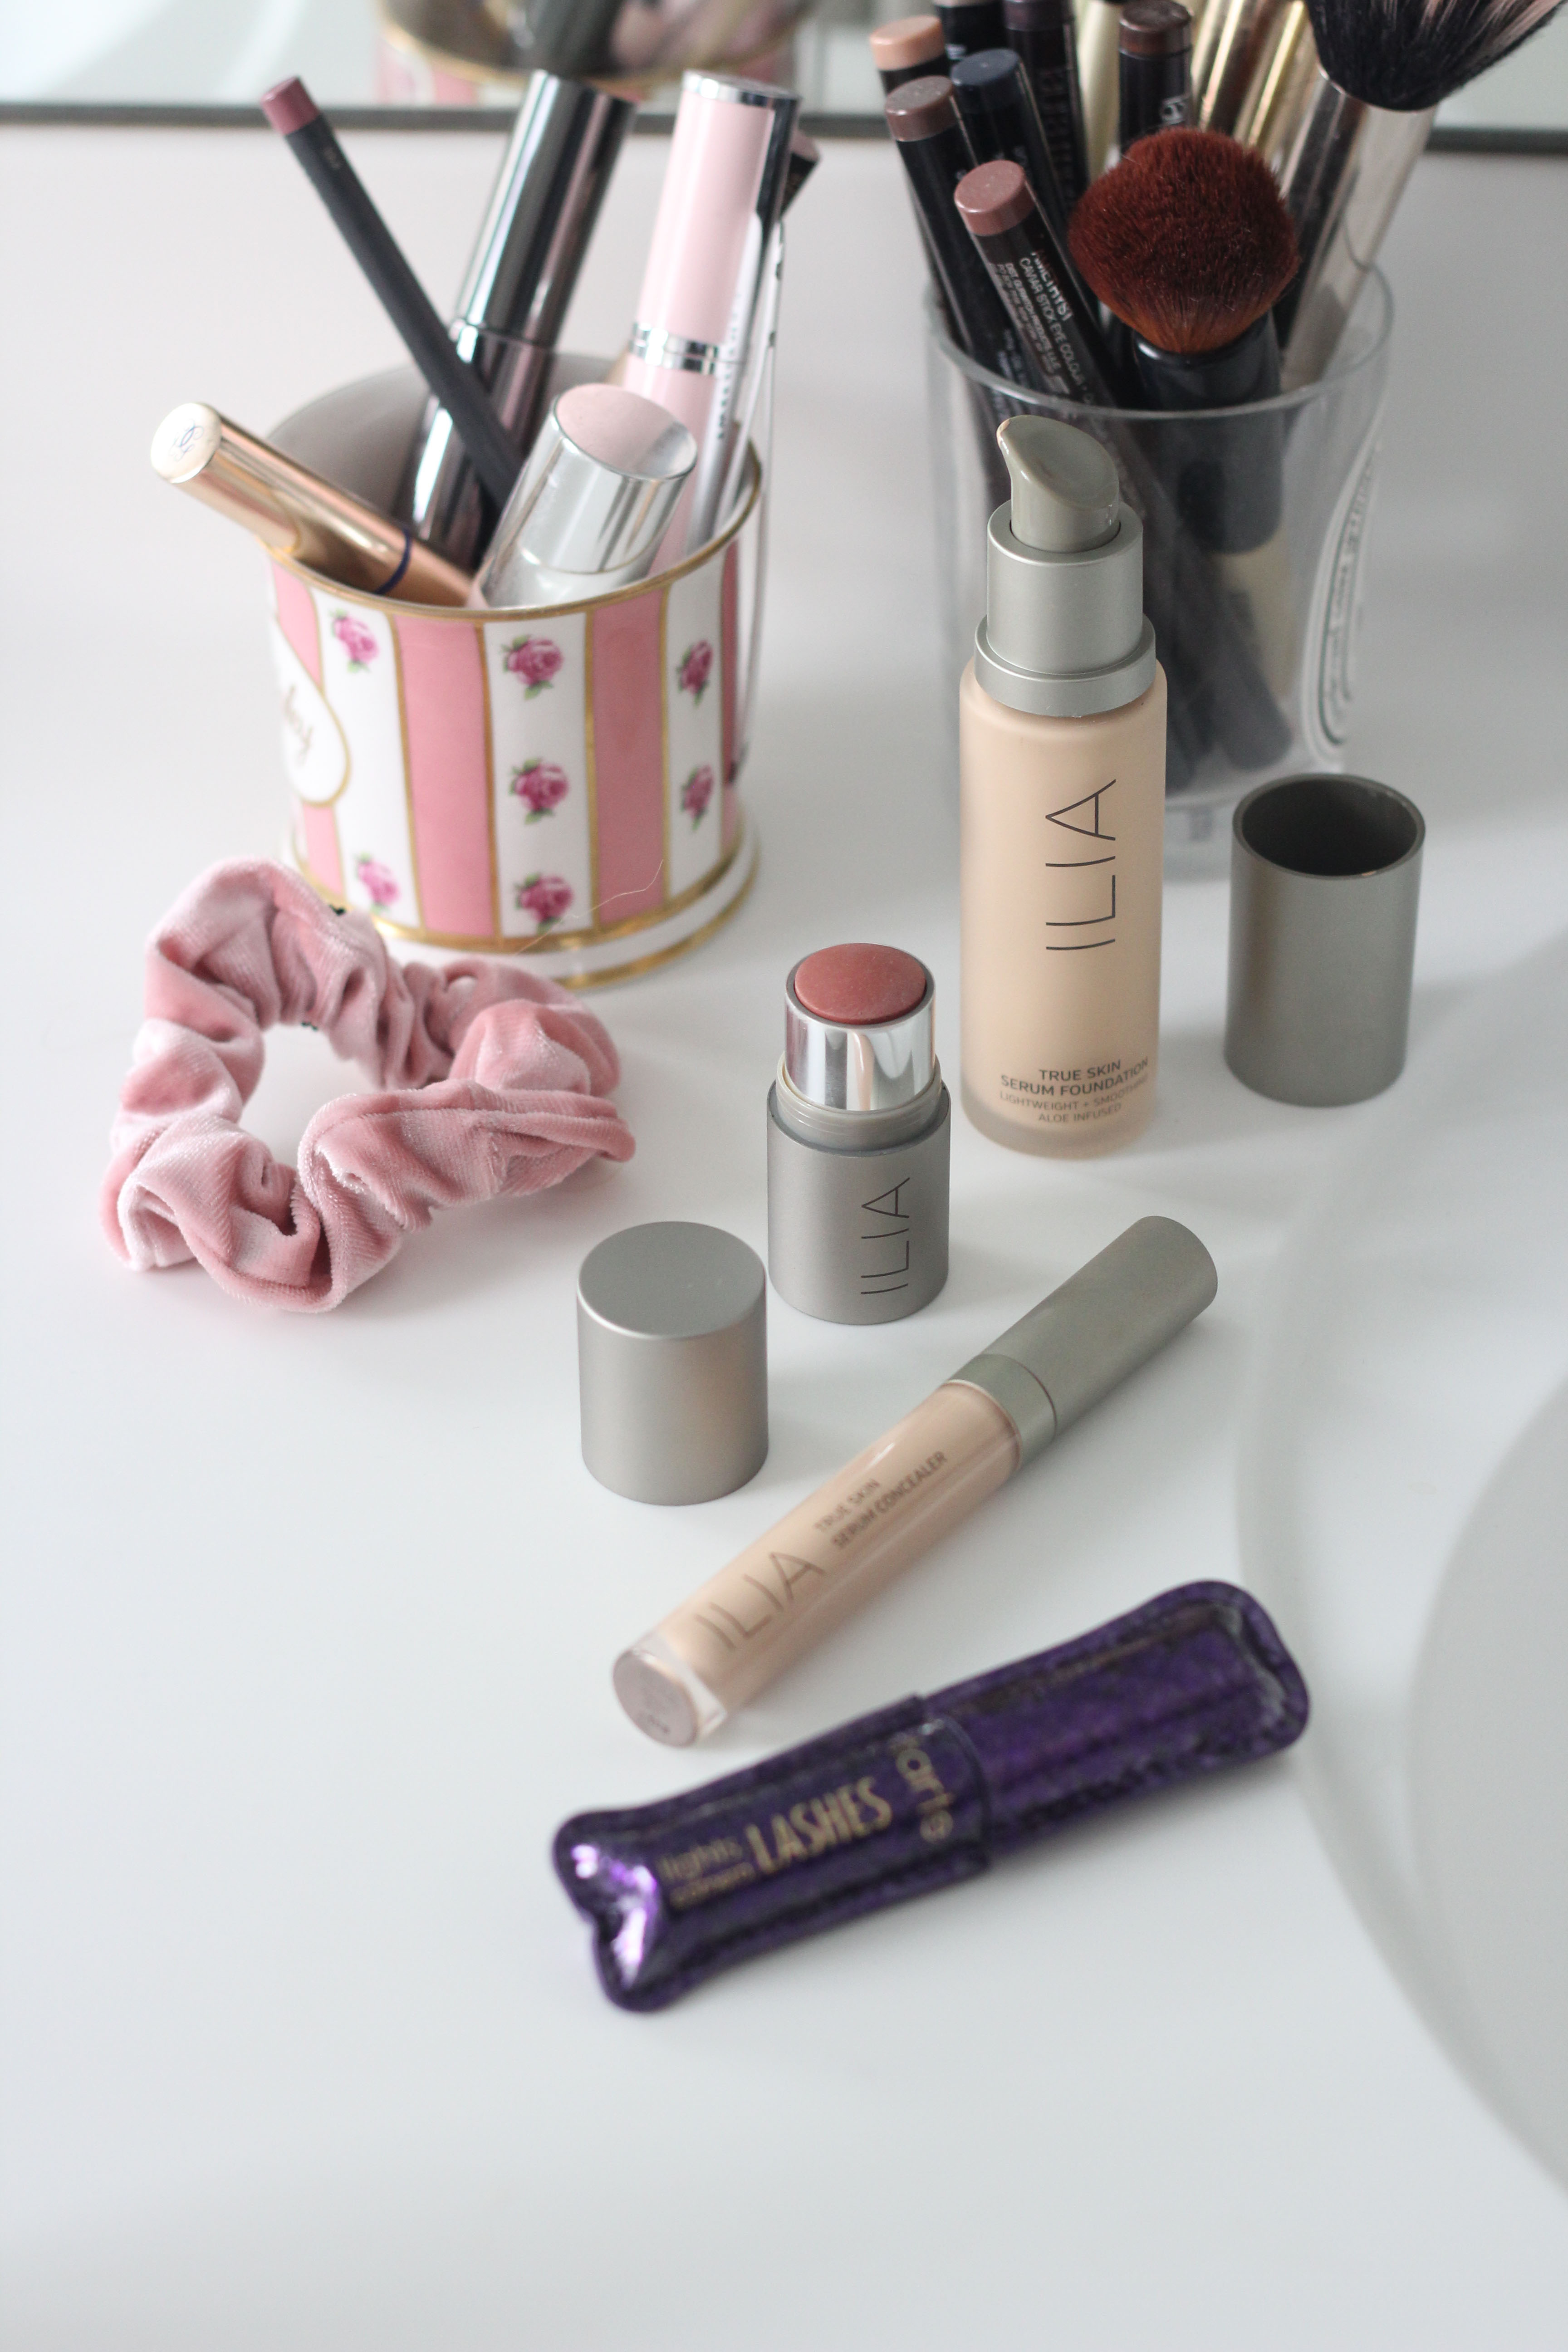 Looking for a clean beauty Foundation and Concealer to nourish, cover and enhance your complexion? Ilia will do all that plus feels great on your skin!